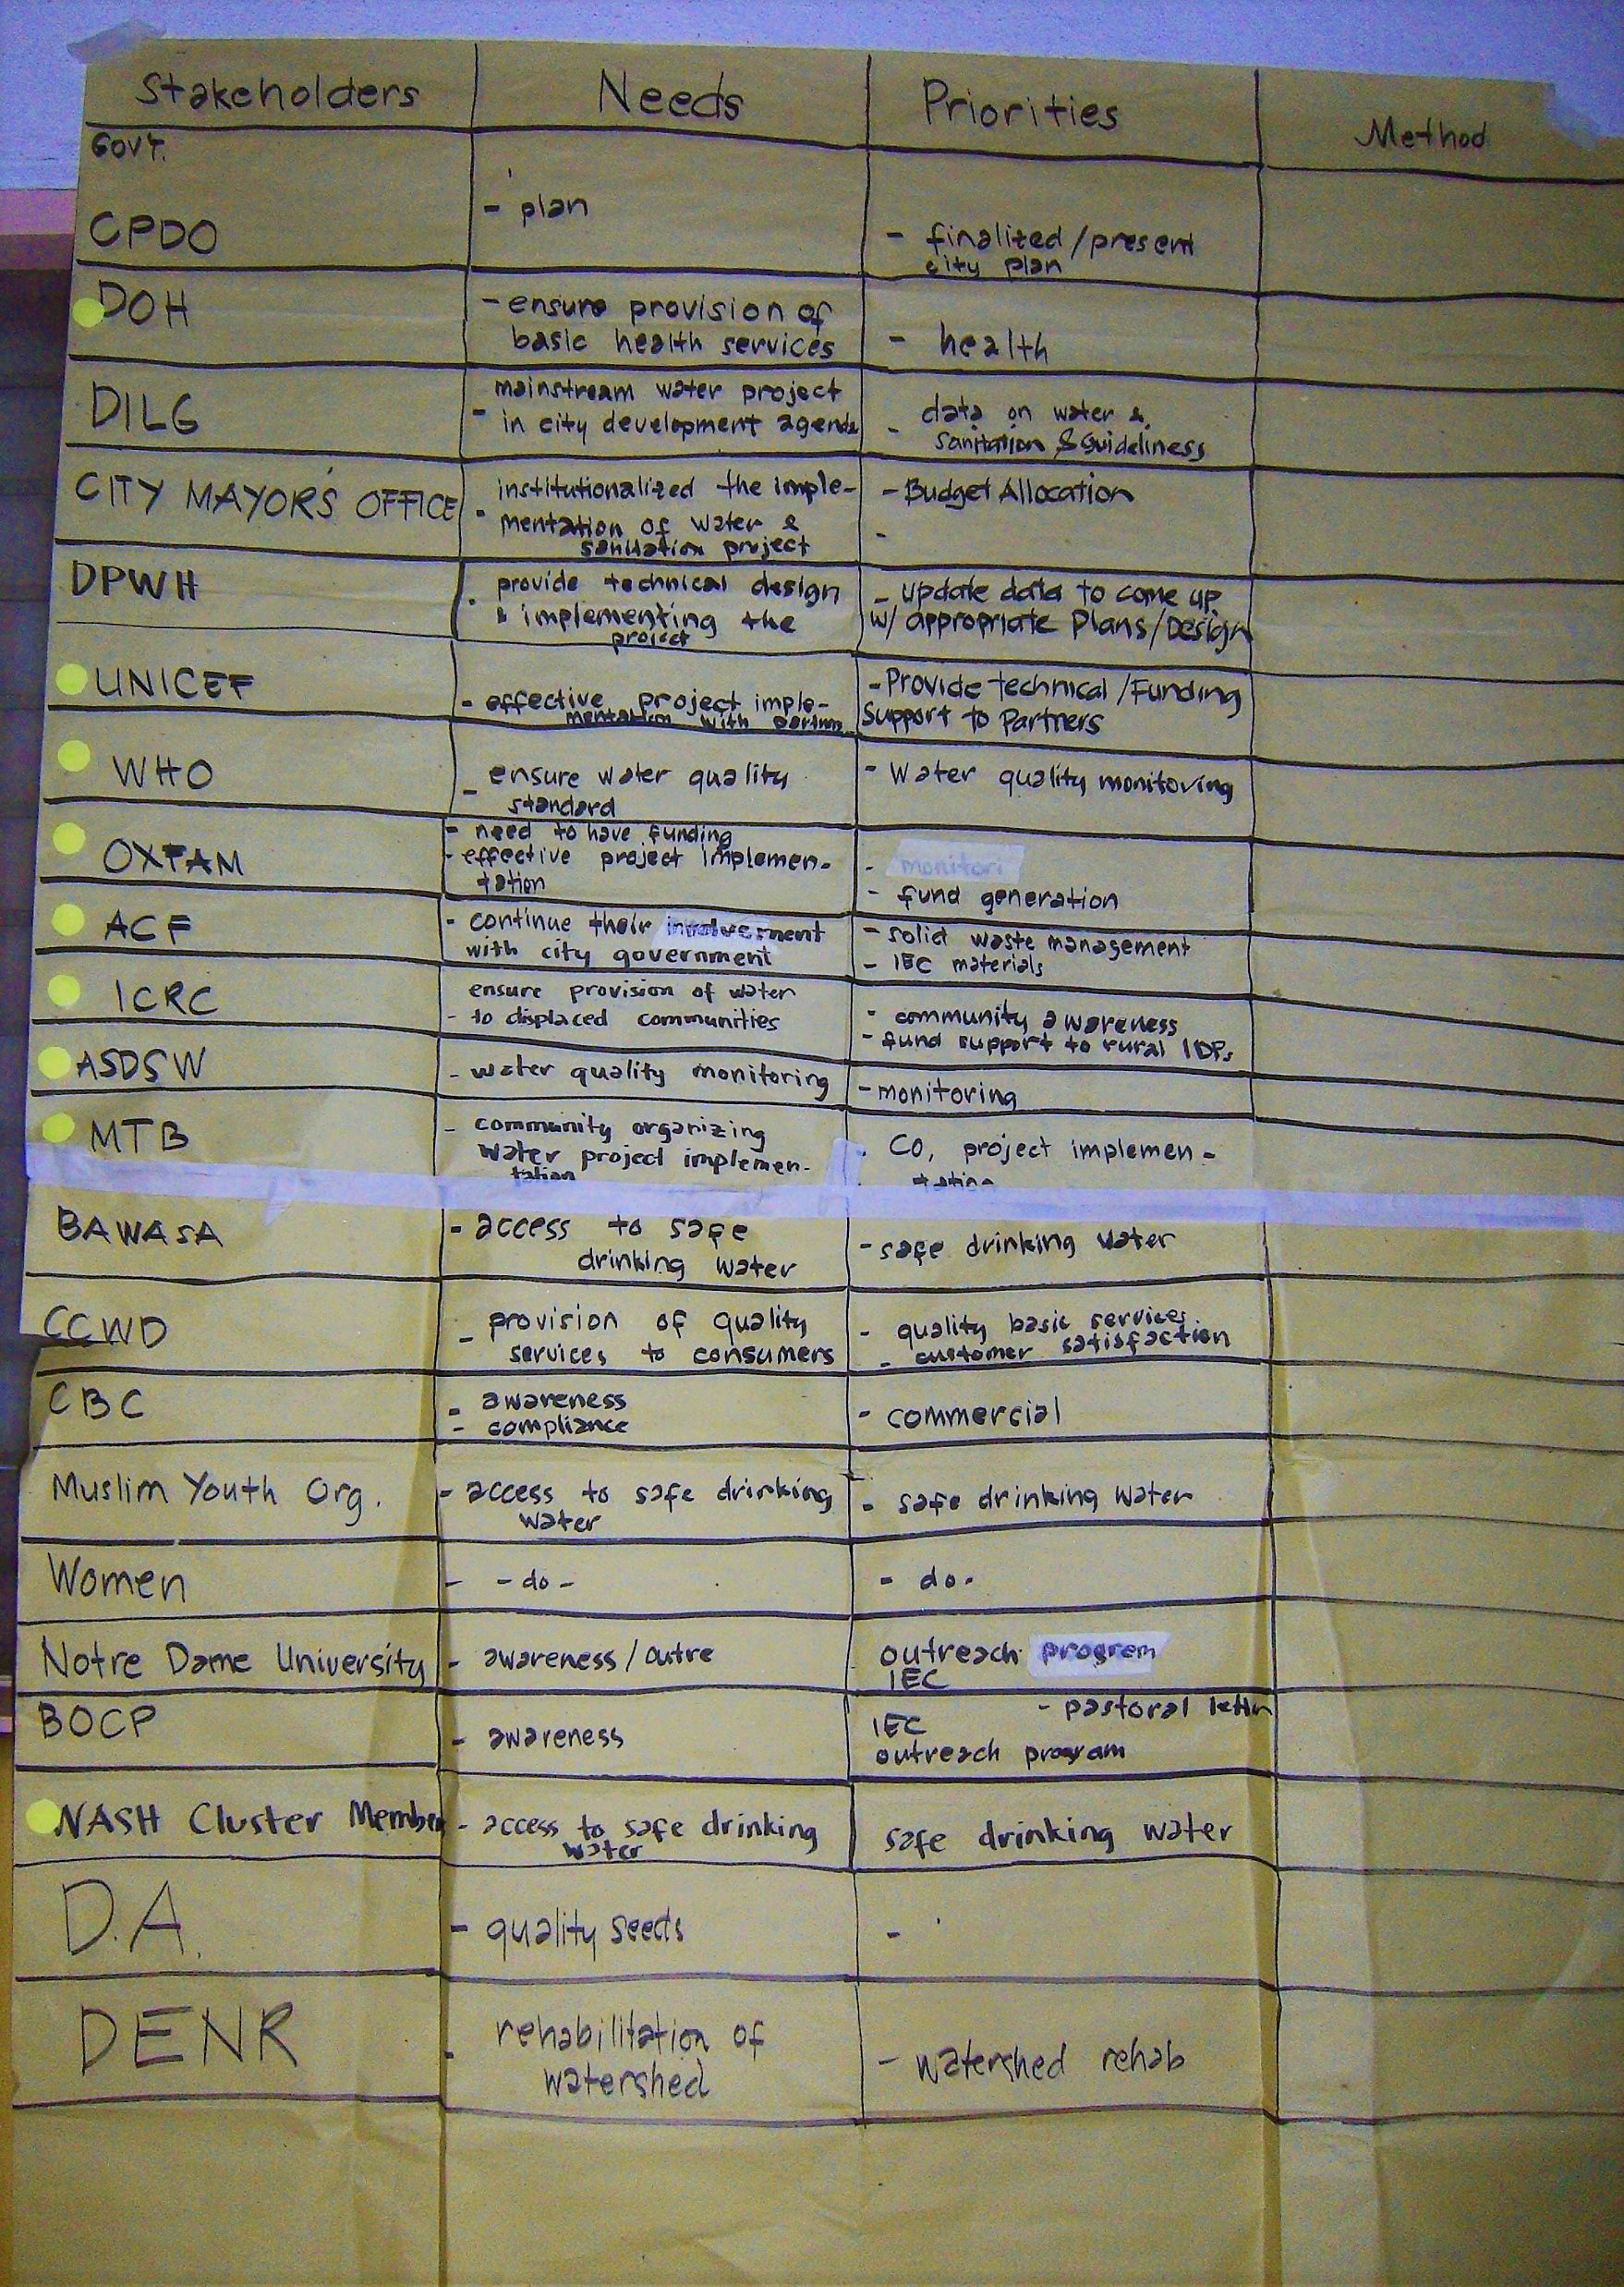 Example of stakeholder list including stakeholder’s interest, in this case expressed over needs and priorities. Additional information that is added can be decided individually in every case